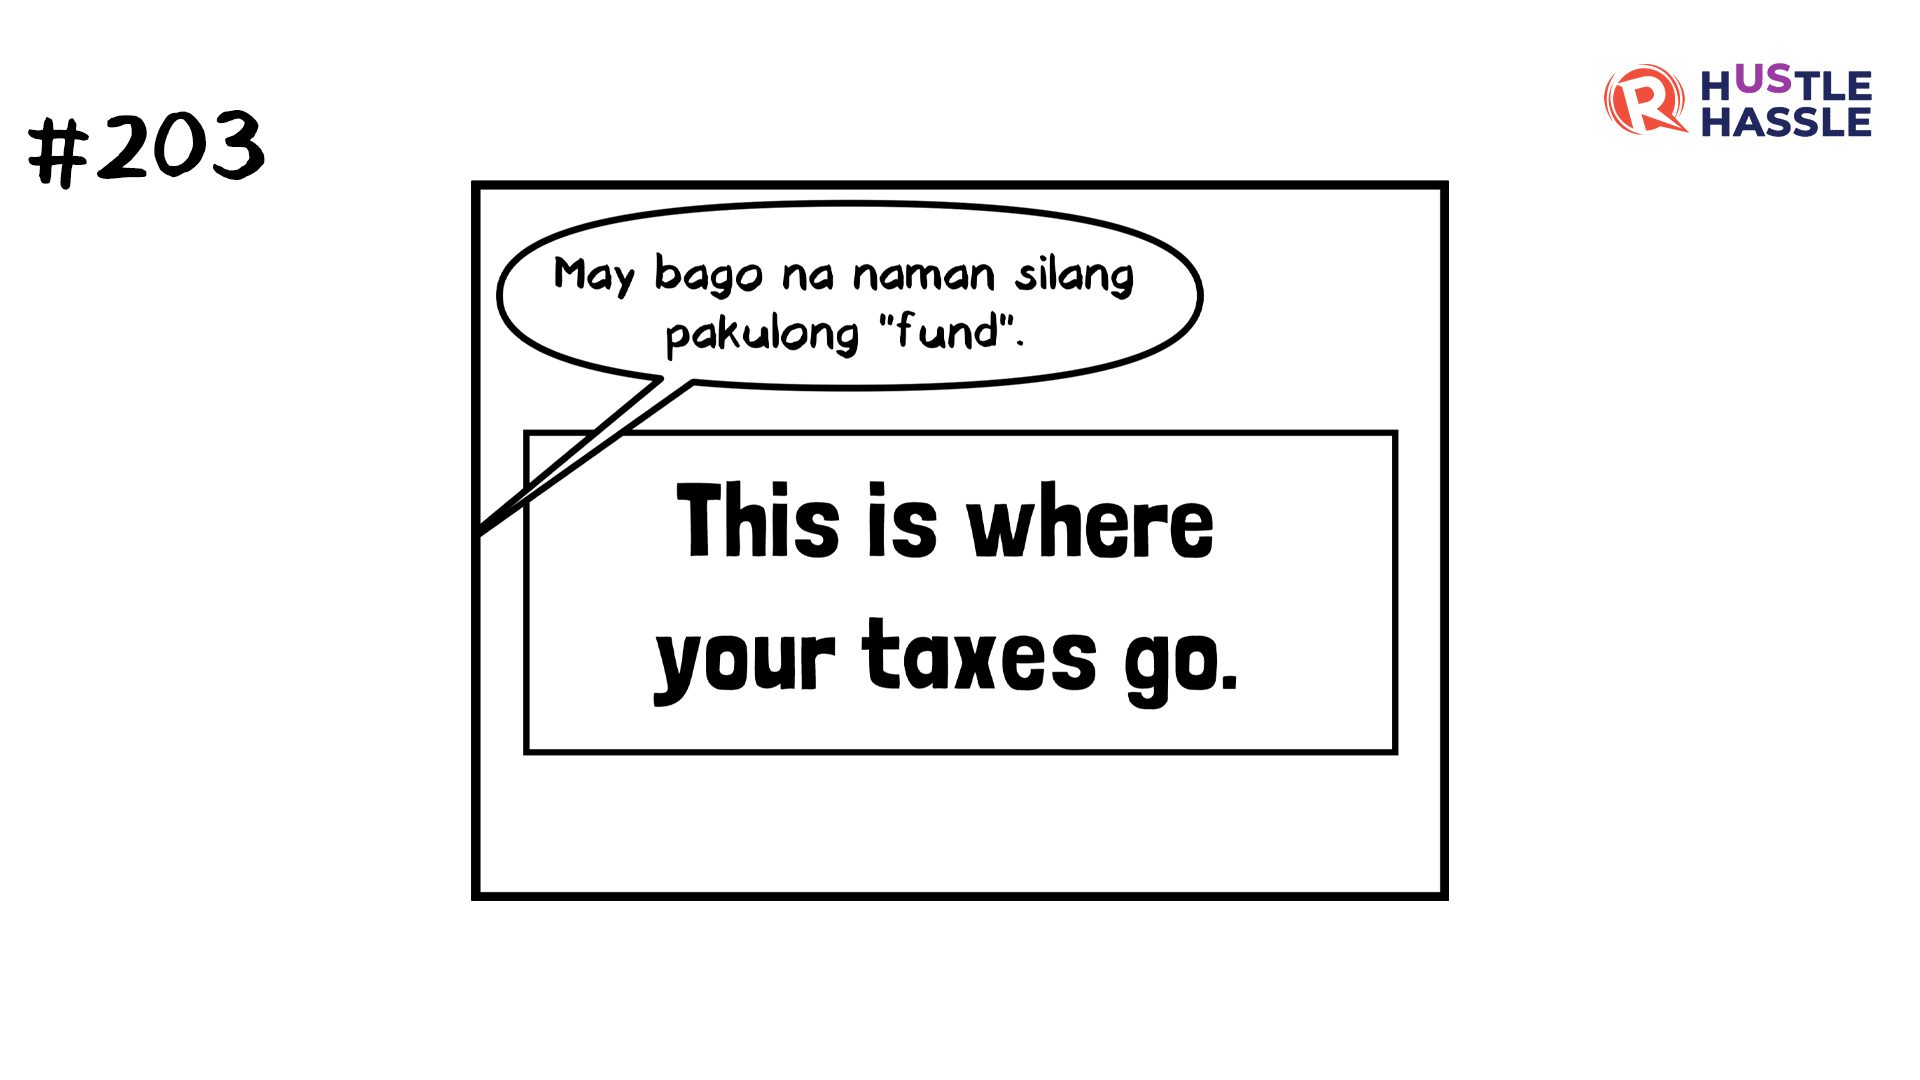 Hustle Hassle: It’s more fund in the Philippines